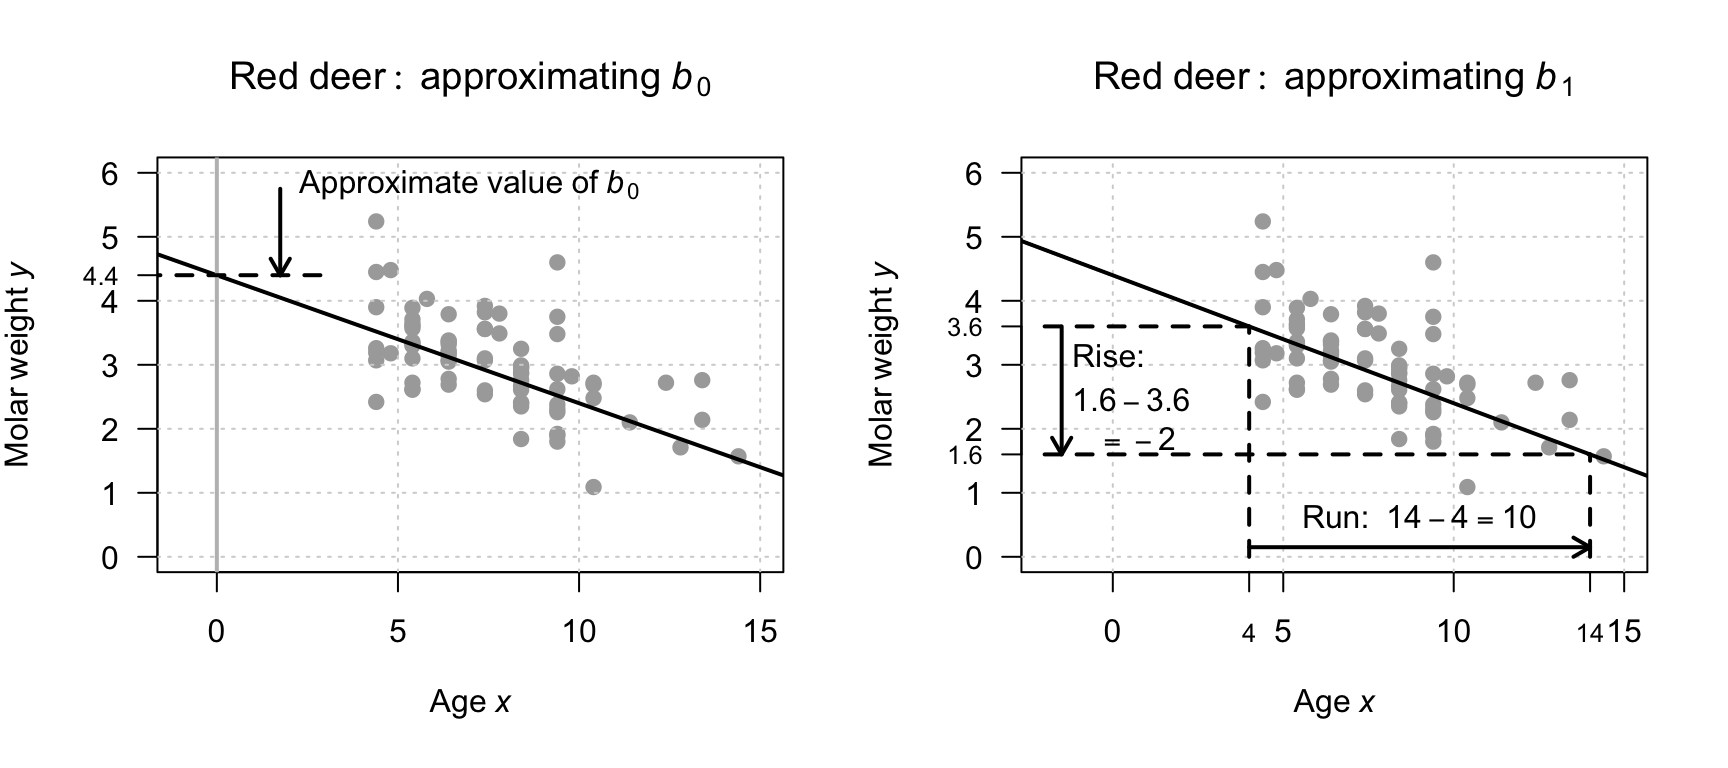 Obtaining rough guesses for the regression equation for the red-deer data. Left: Approximating $b_0$. Right: approximating $b_1$ using rise-over-run